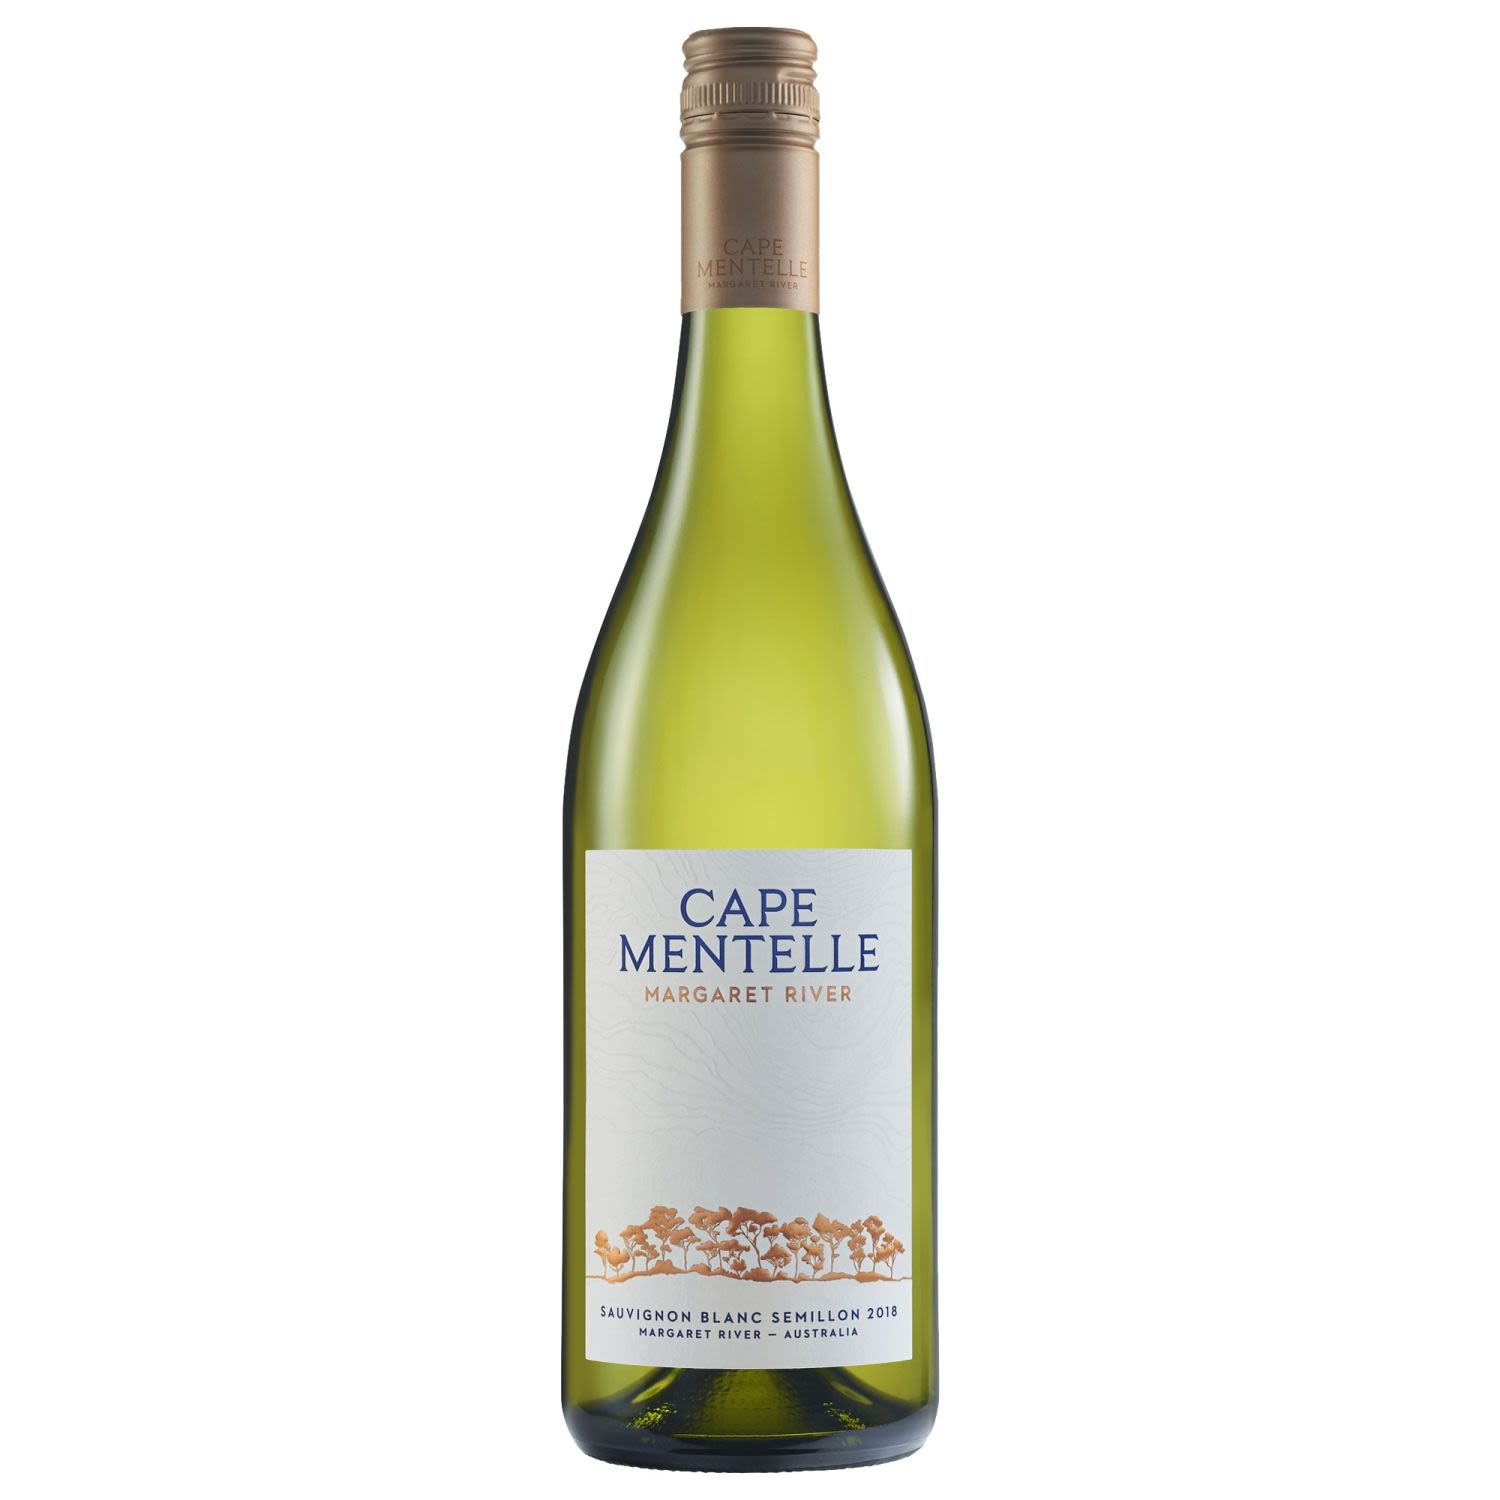 Cape Mentelle takes a non-interventionist approach towards this classic Margaret River blend of Sauvignon Blanc and Semillon, preserving much fruit intensity and regional character. The style accentuates the fresh, vibrant fruit characters of both varieties with the added complexity and palate weight offered through a small component of barrel fermentation.<br /> <br />Alcohol Volume: 13.00%<br /><br />Pack Format: Bottle<br /><br />Standard Drinks: 7.7<br /><br />Pack Type: Bottle<br /><br />Country of Origin: Australia<br /><br />Region: Margaret River<br /><br />Vintage: Vintages Vary<br />